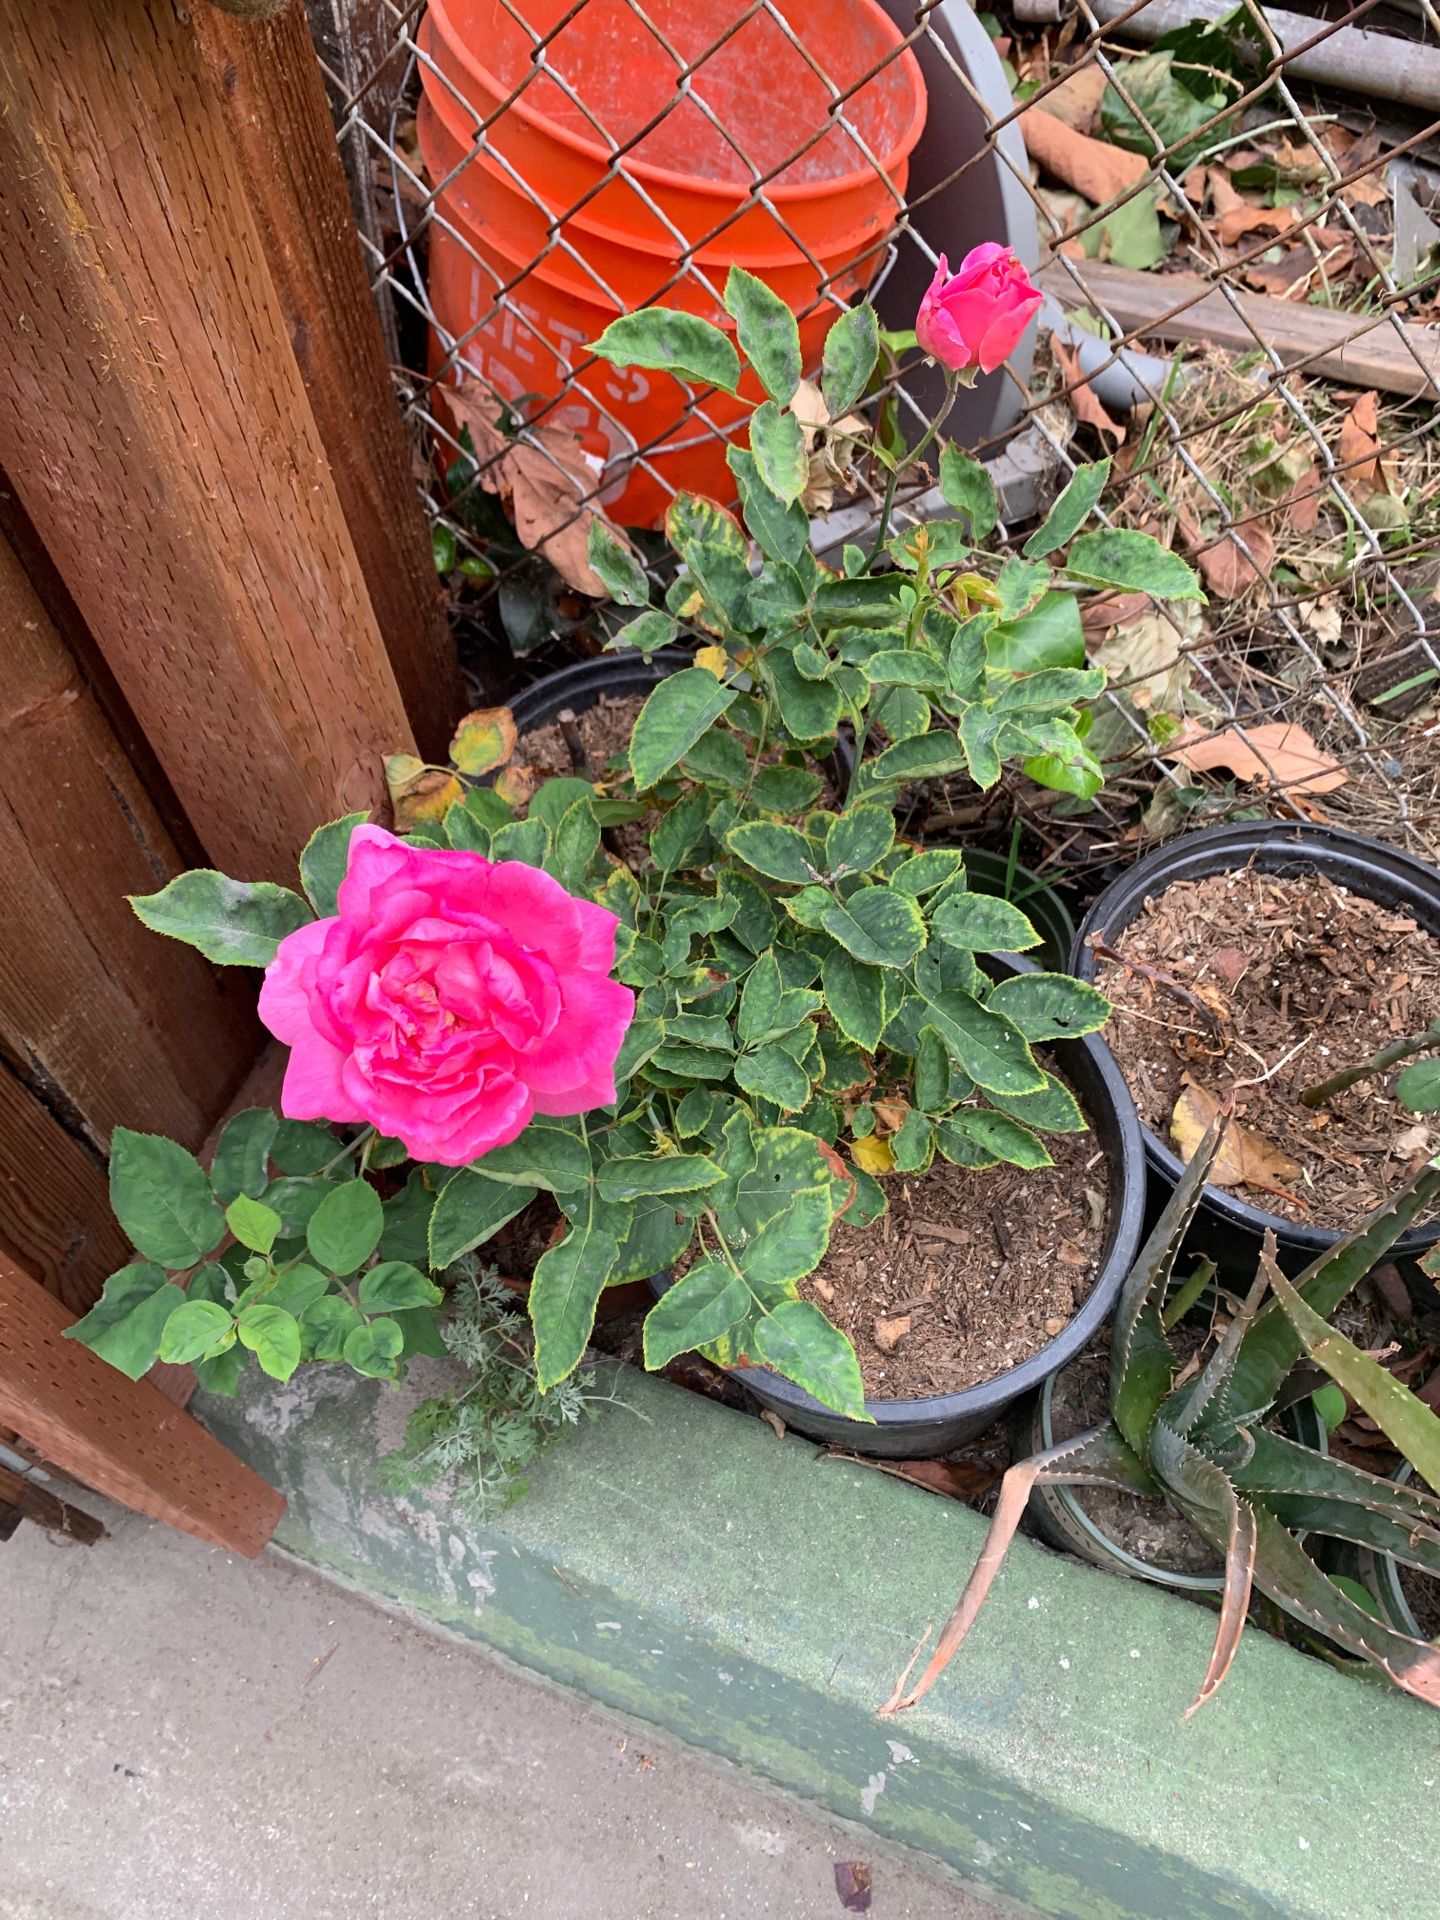 Roses and plants